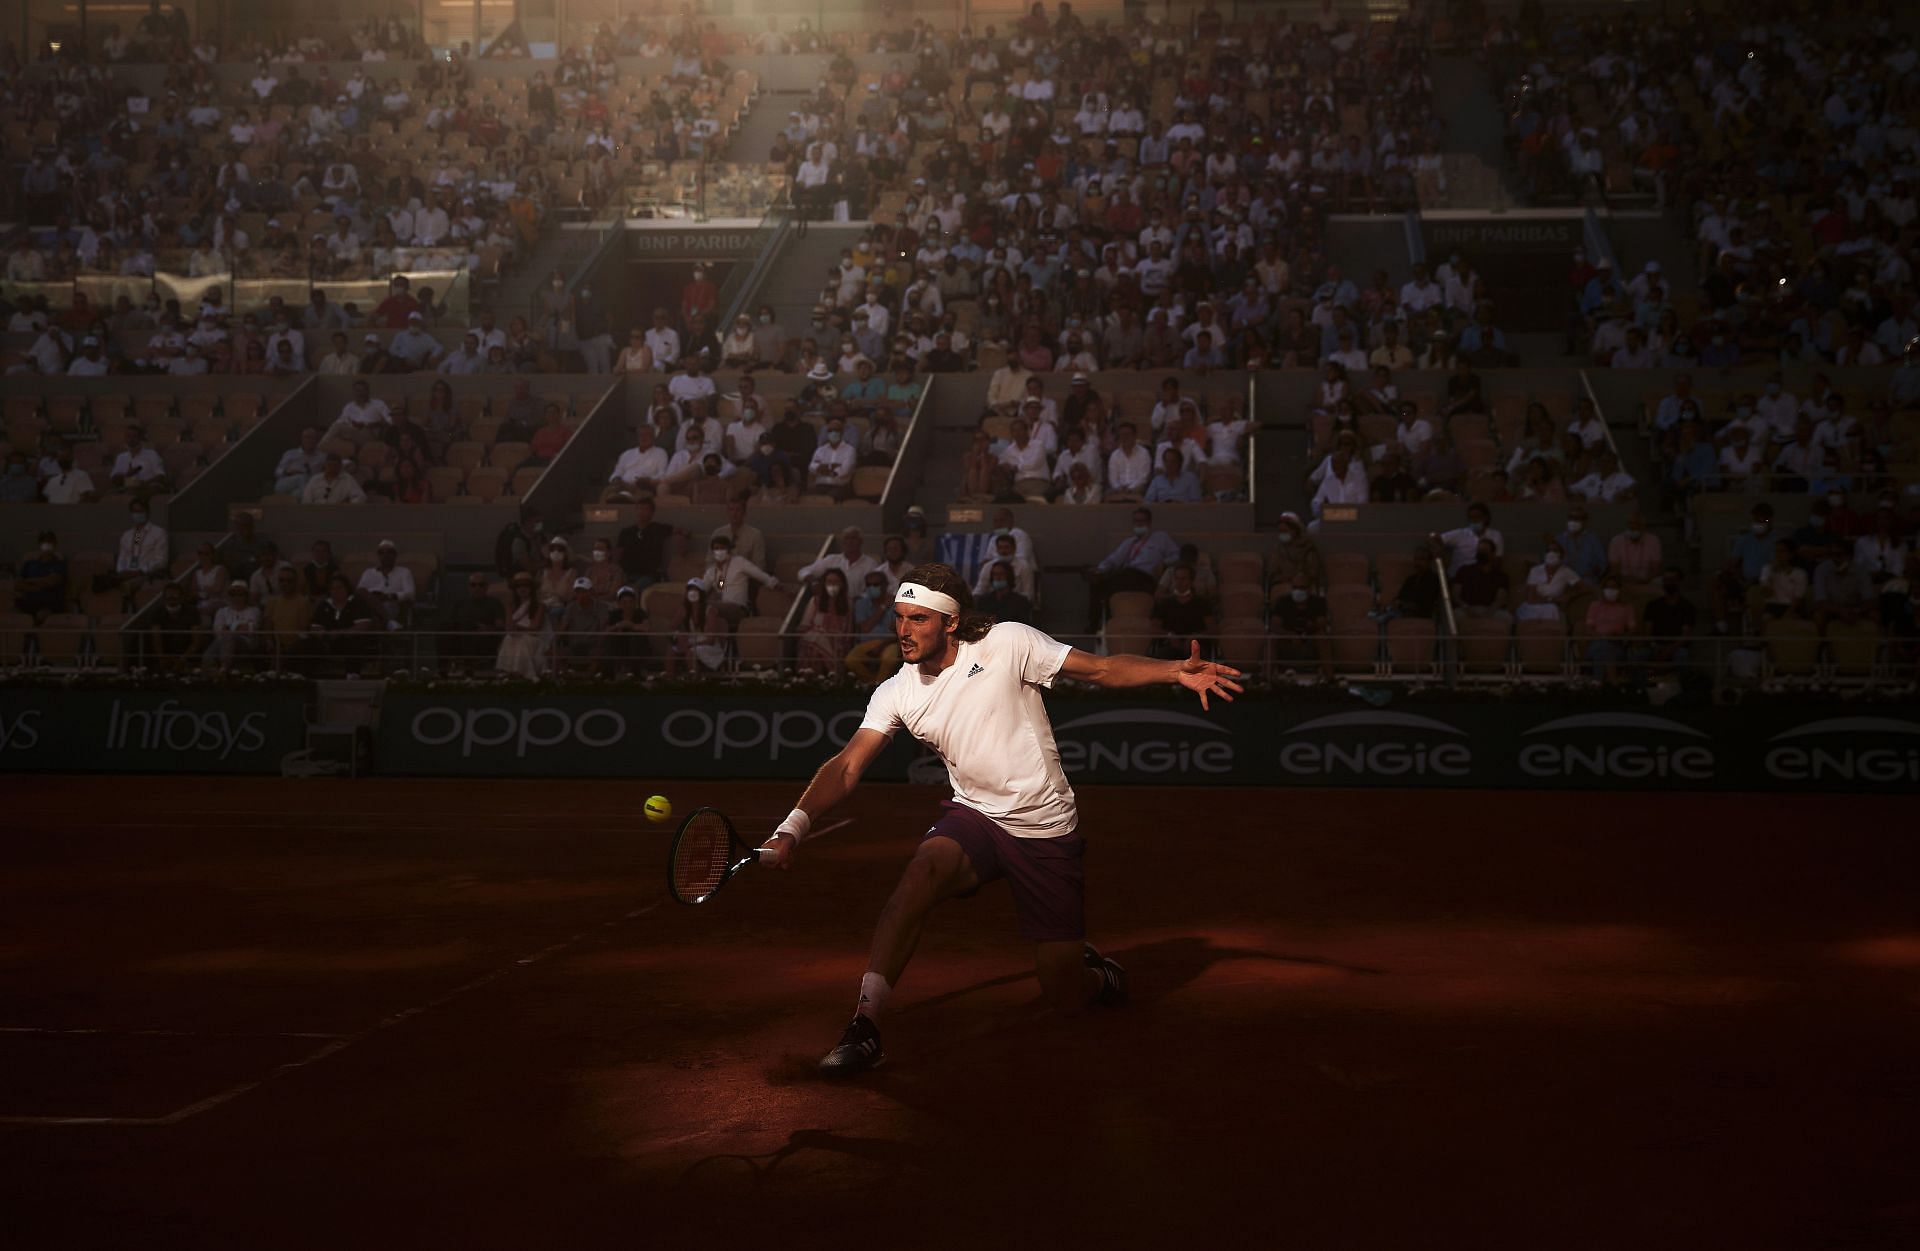 The Greek in action at the 2021 French Open final